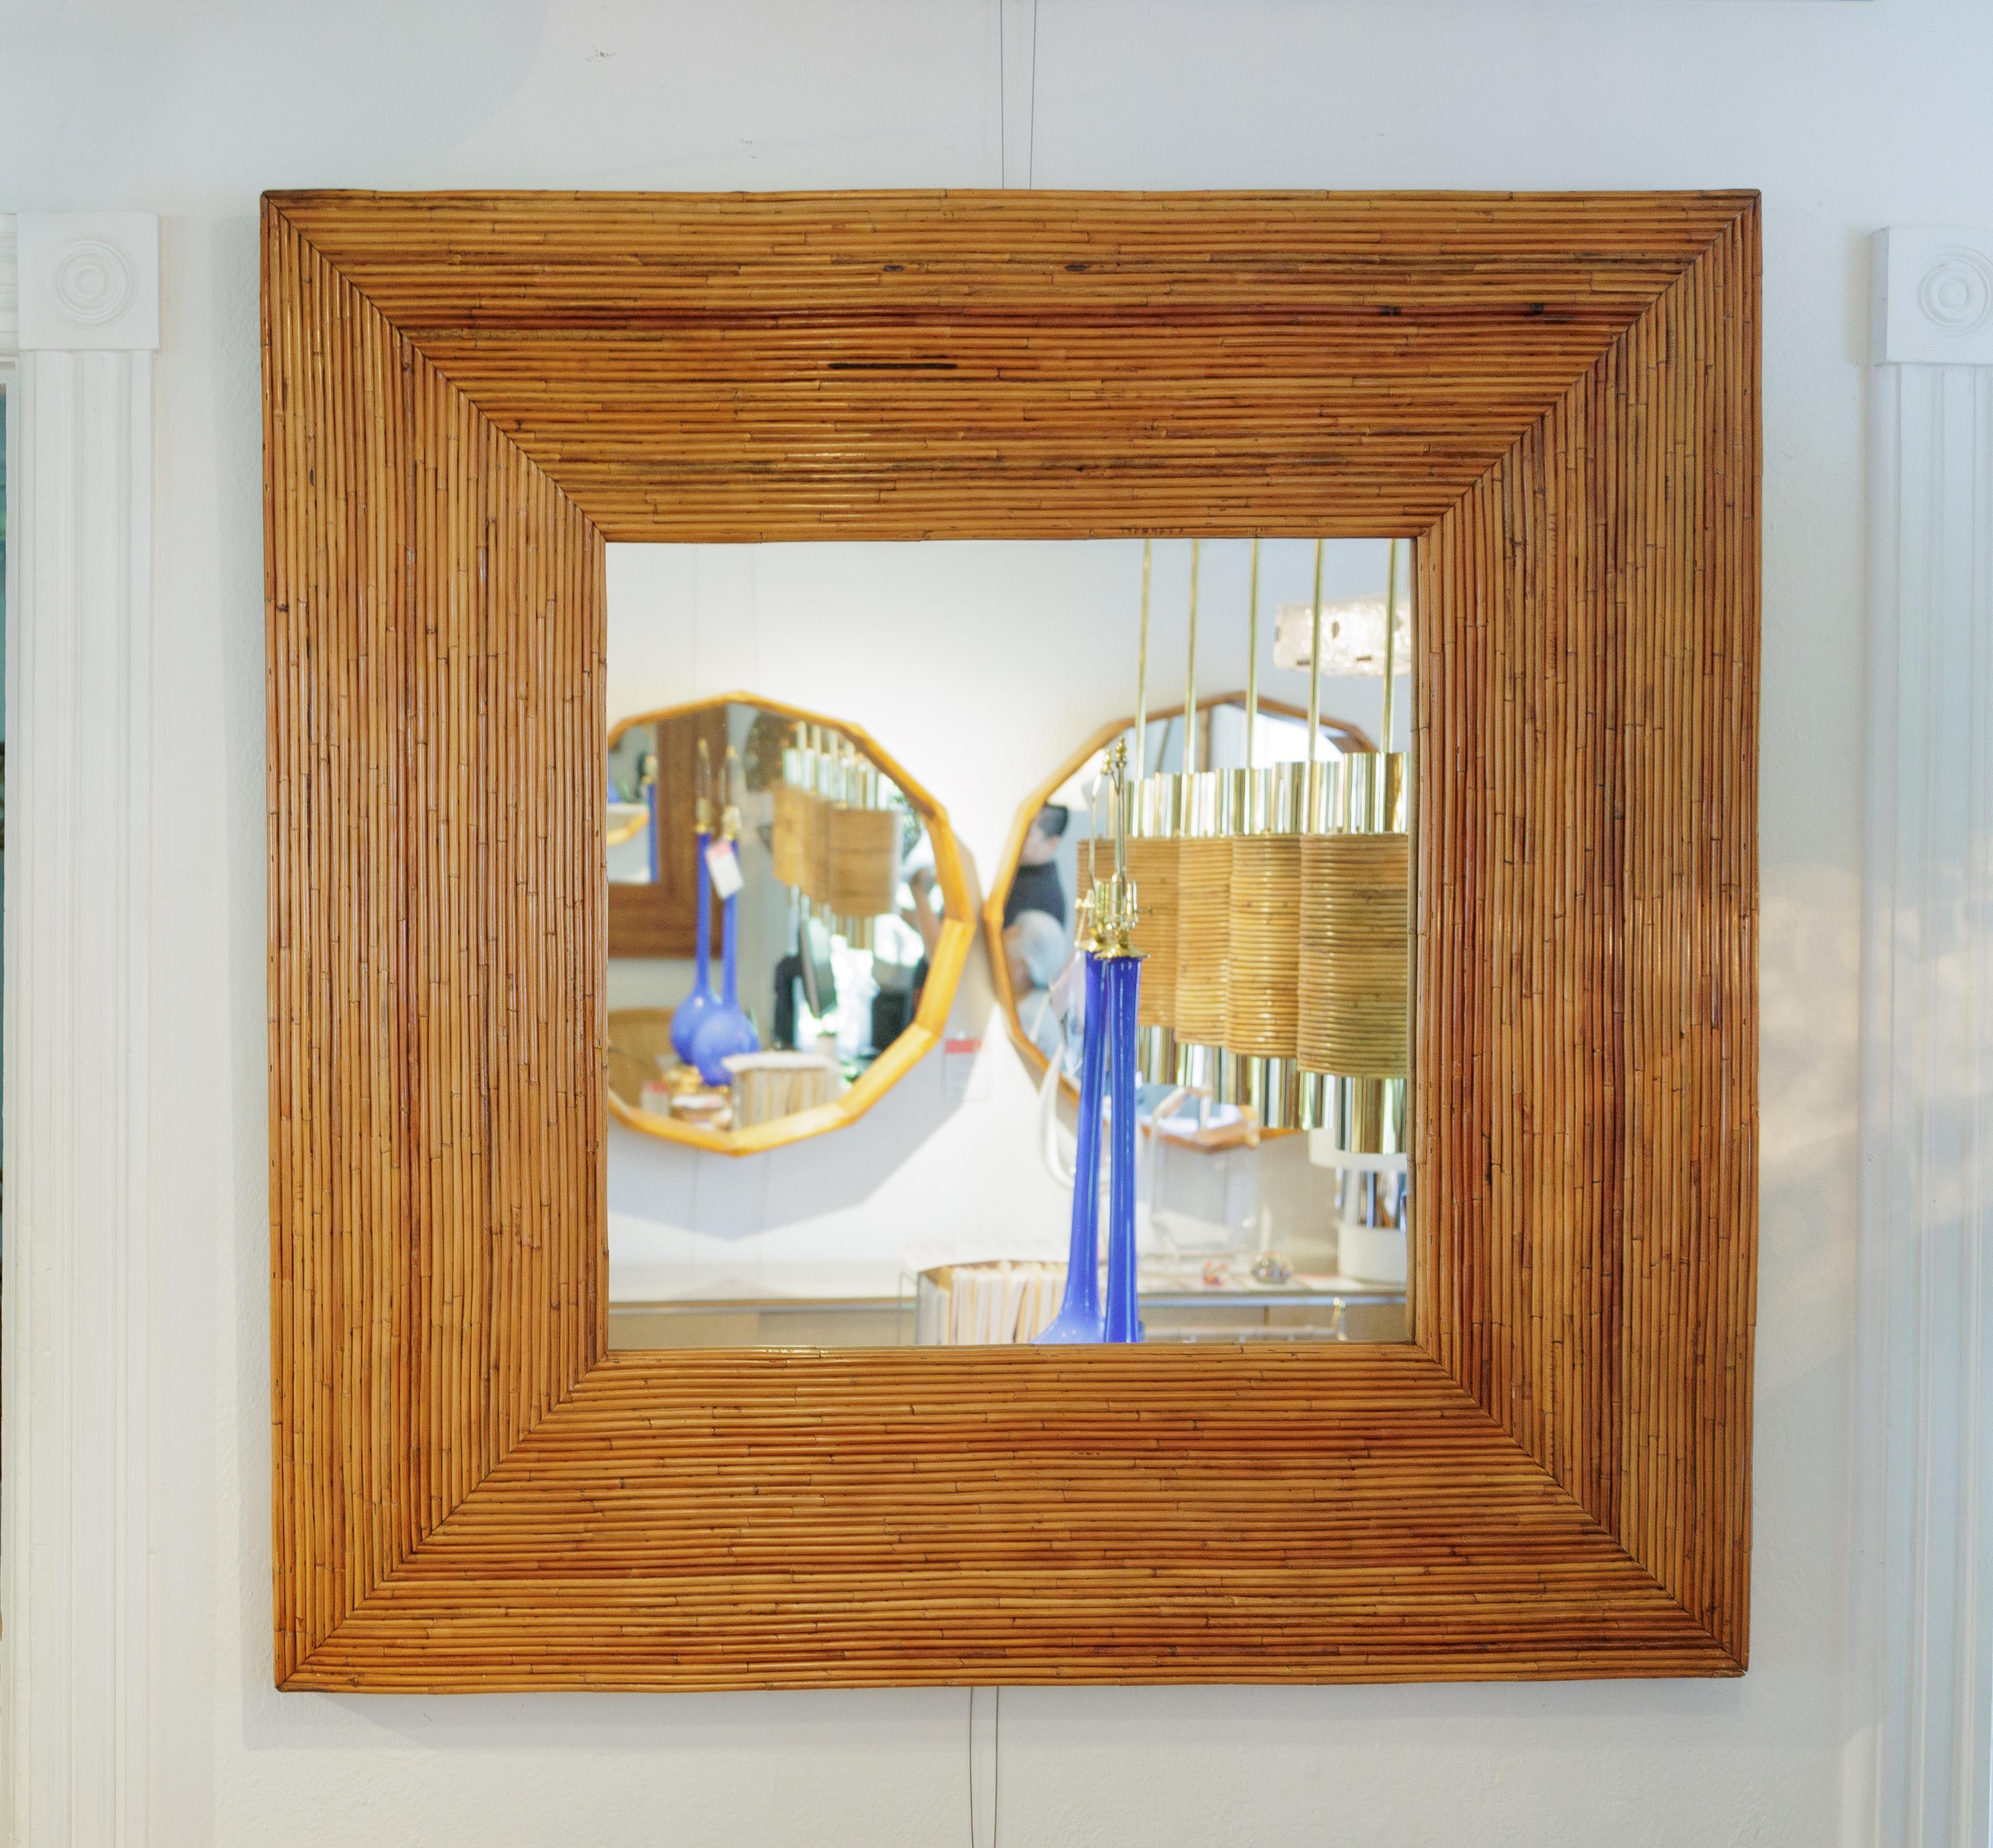 American Square Pencil Reed Bamboo Surround Mirror For Sale